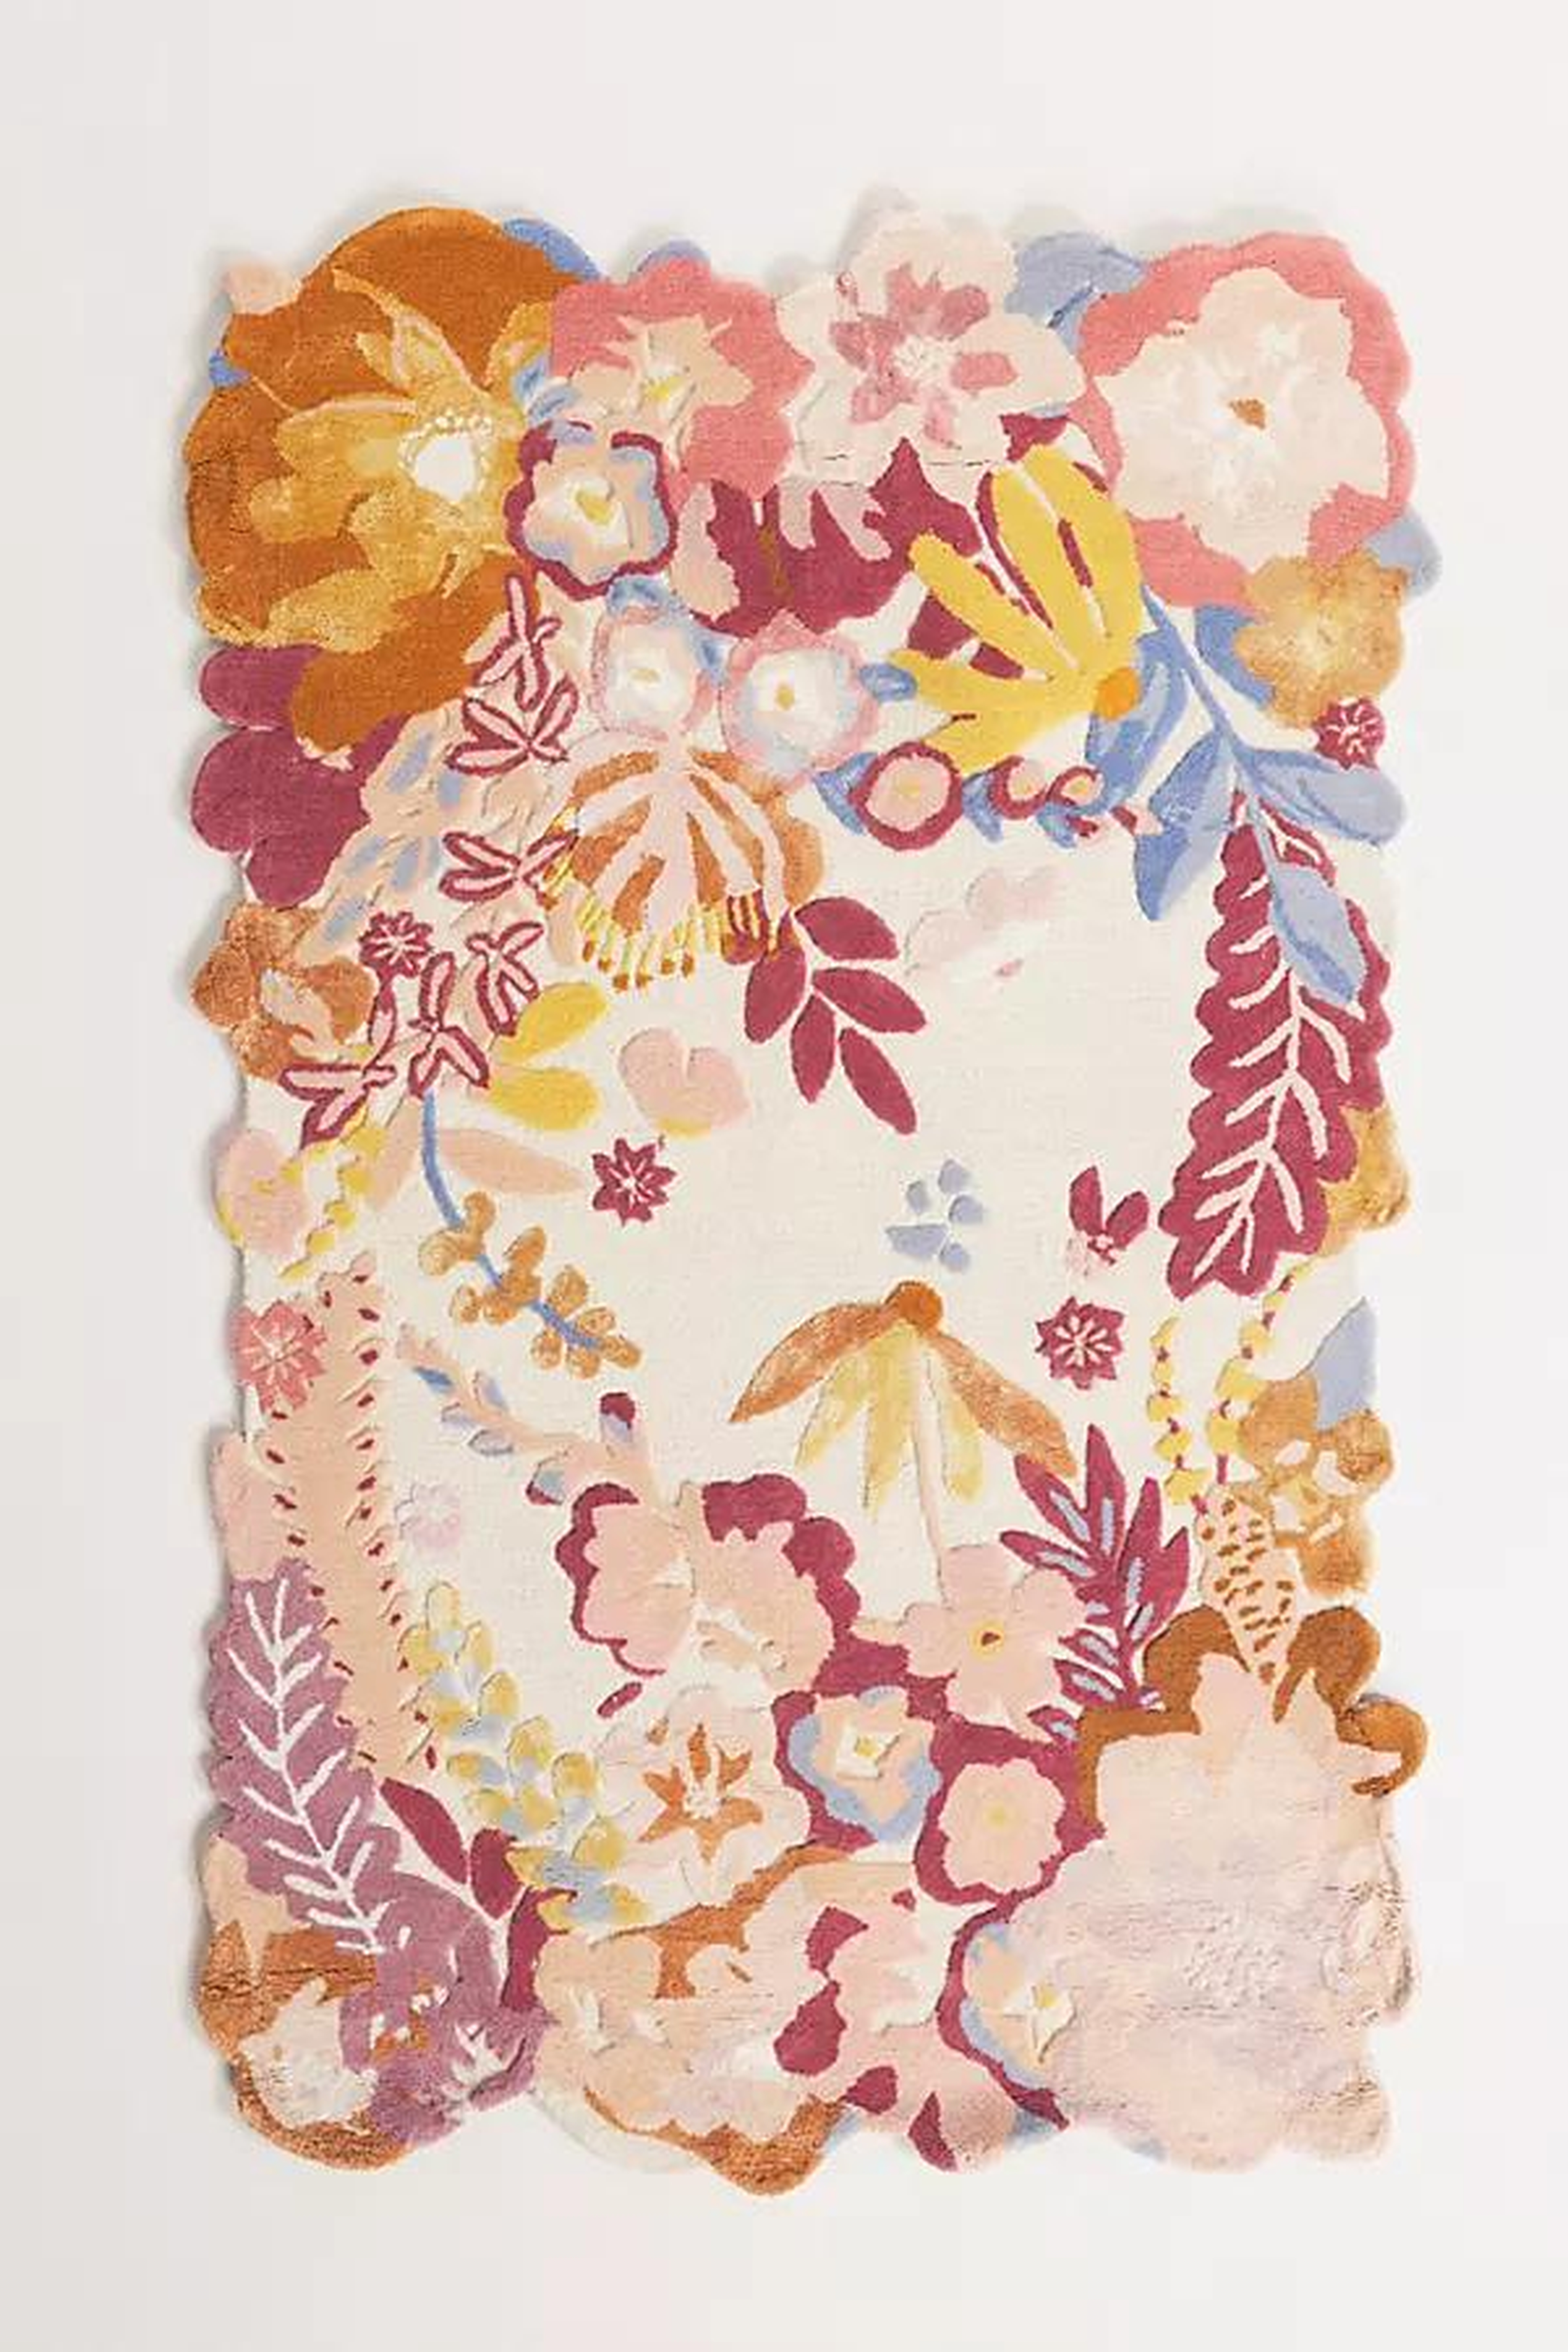 Tufted Jardin Rug By Anthropologie in Pink Size 5X8 - Anthropologie